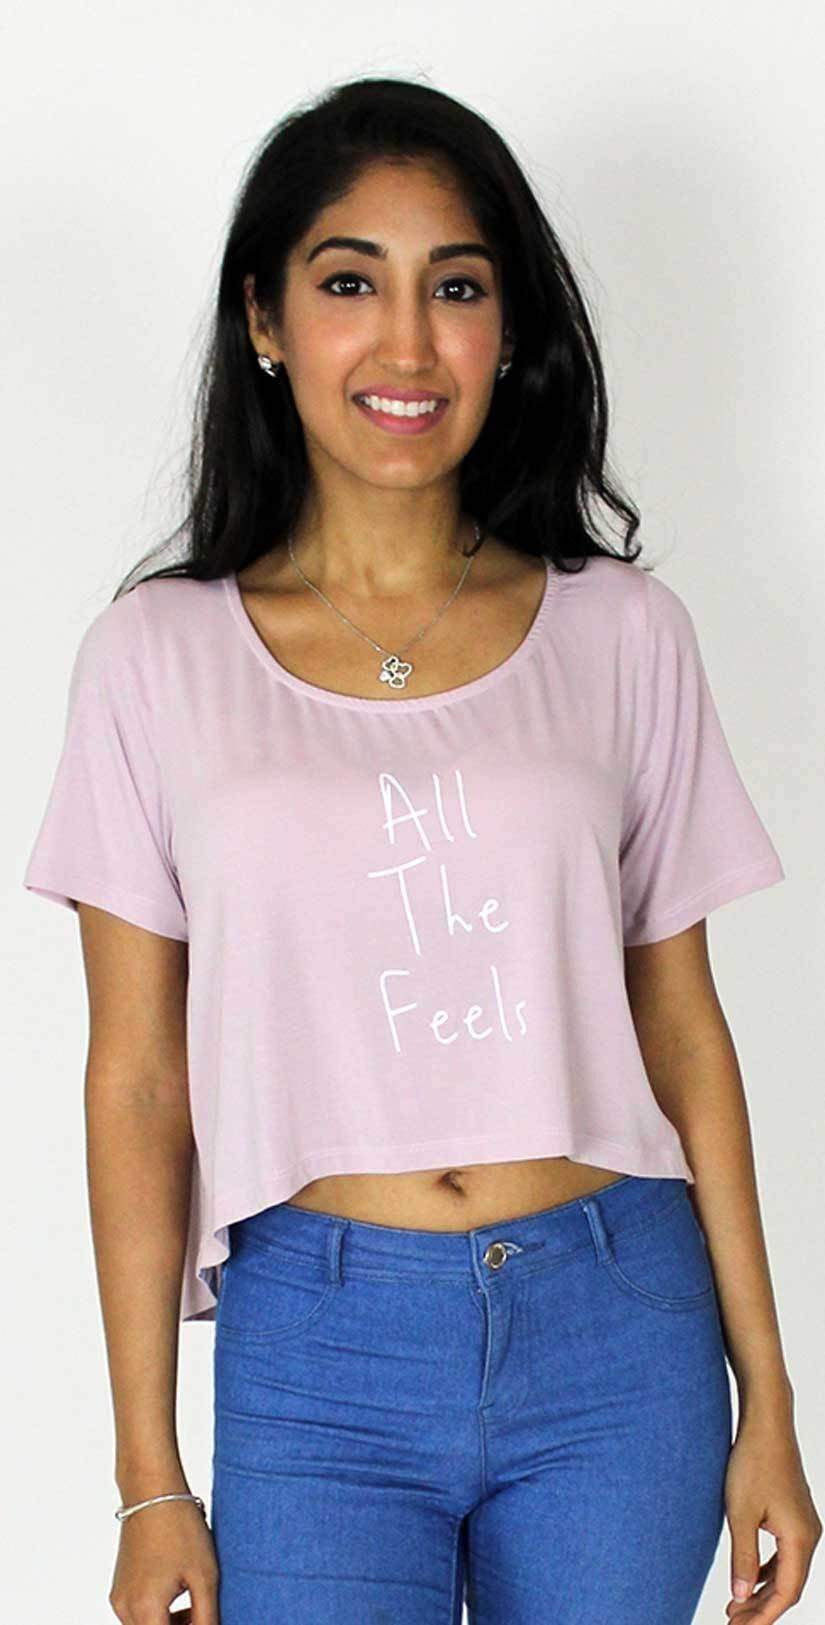 Ete Apparel All the Feels Crop Top Tee 1-13-BLSH-ATF-17-P: